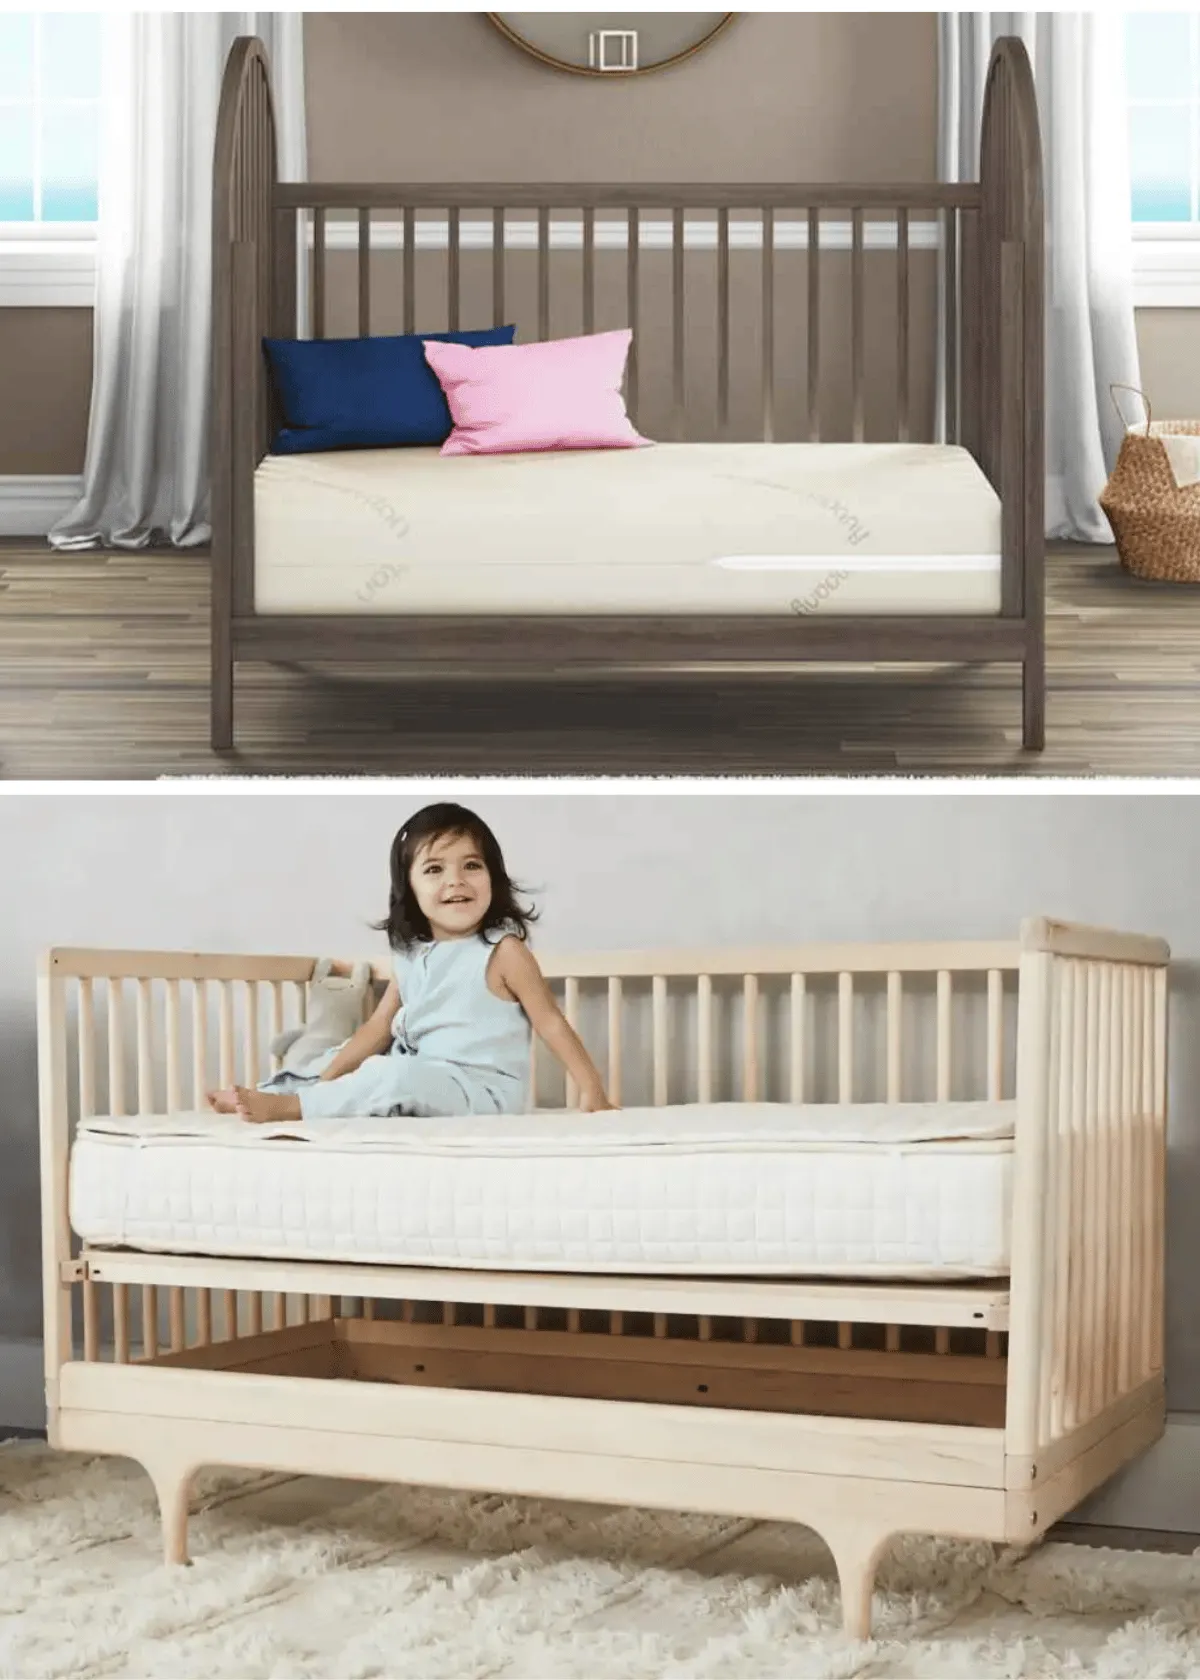 "Best Crib Mattress for Your Baby's Sleep, Safety and Comfort"